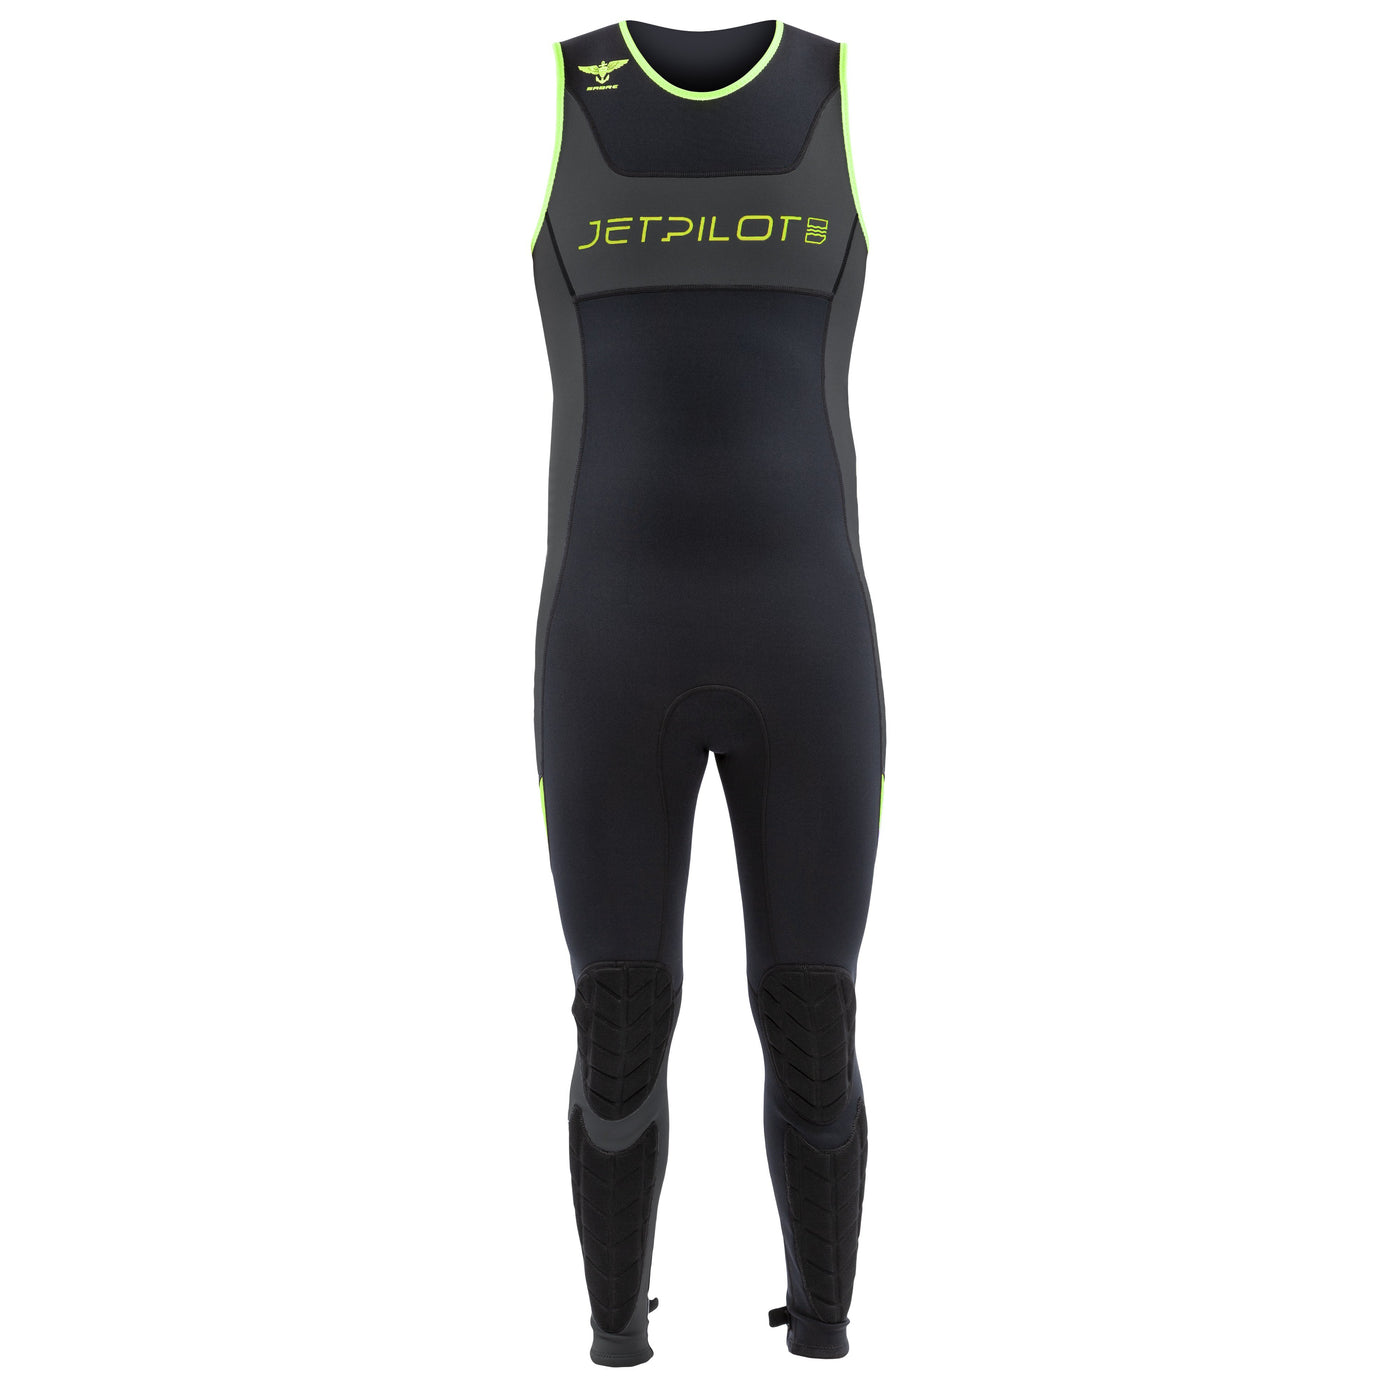 Front view of the Jetpilot F-86 Sabre John wetsuit Black colorway.